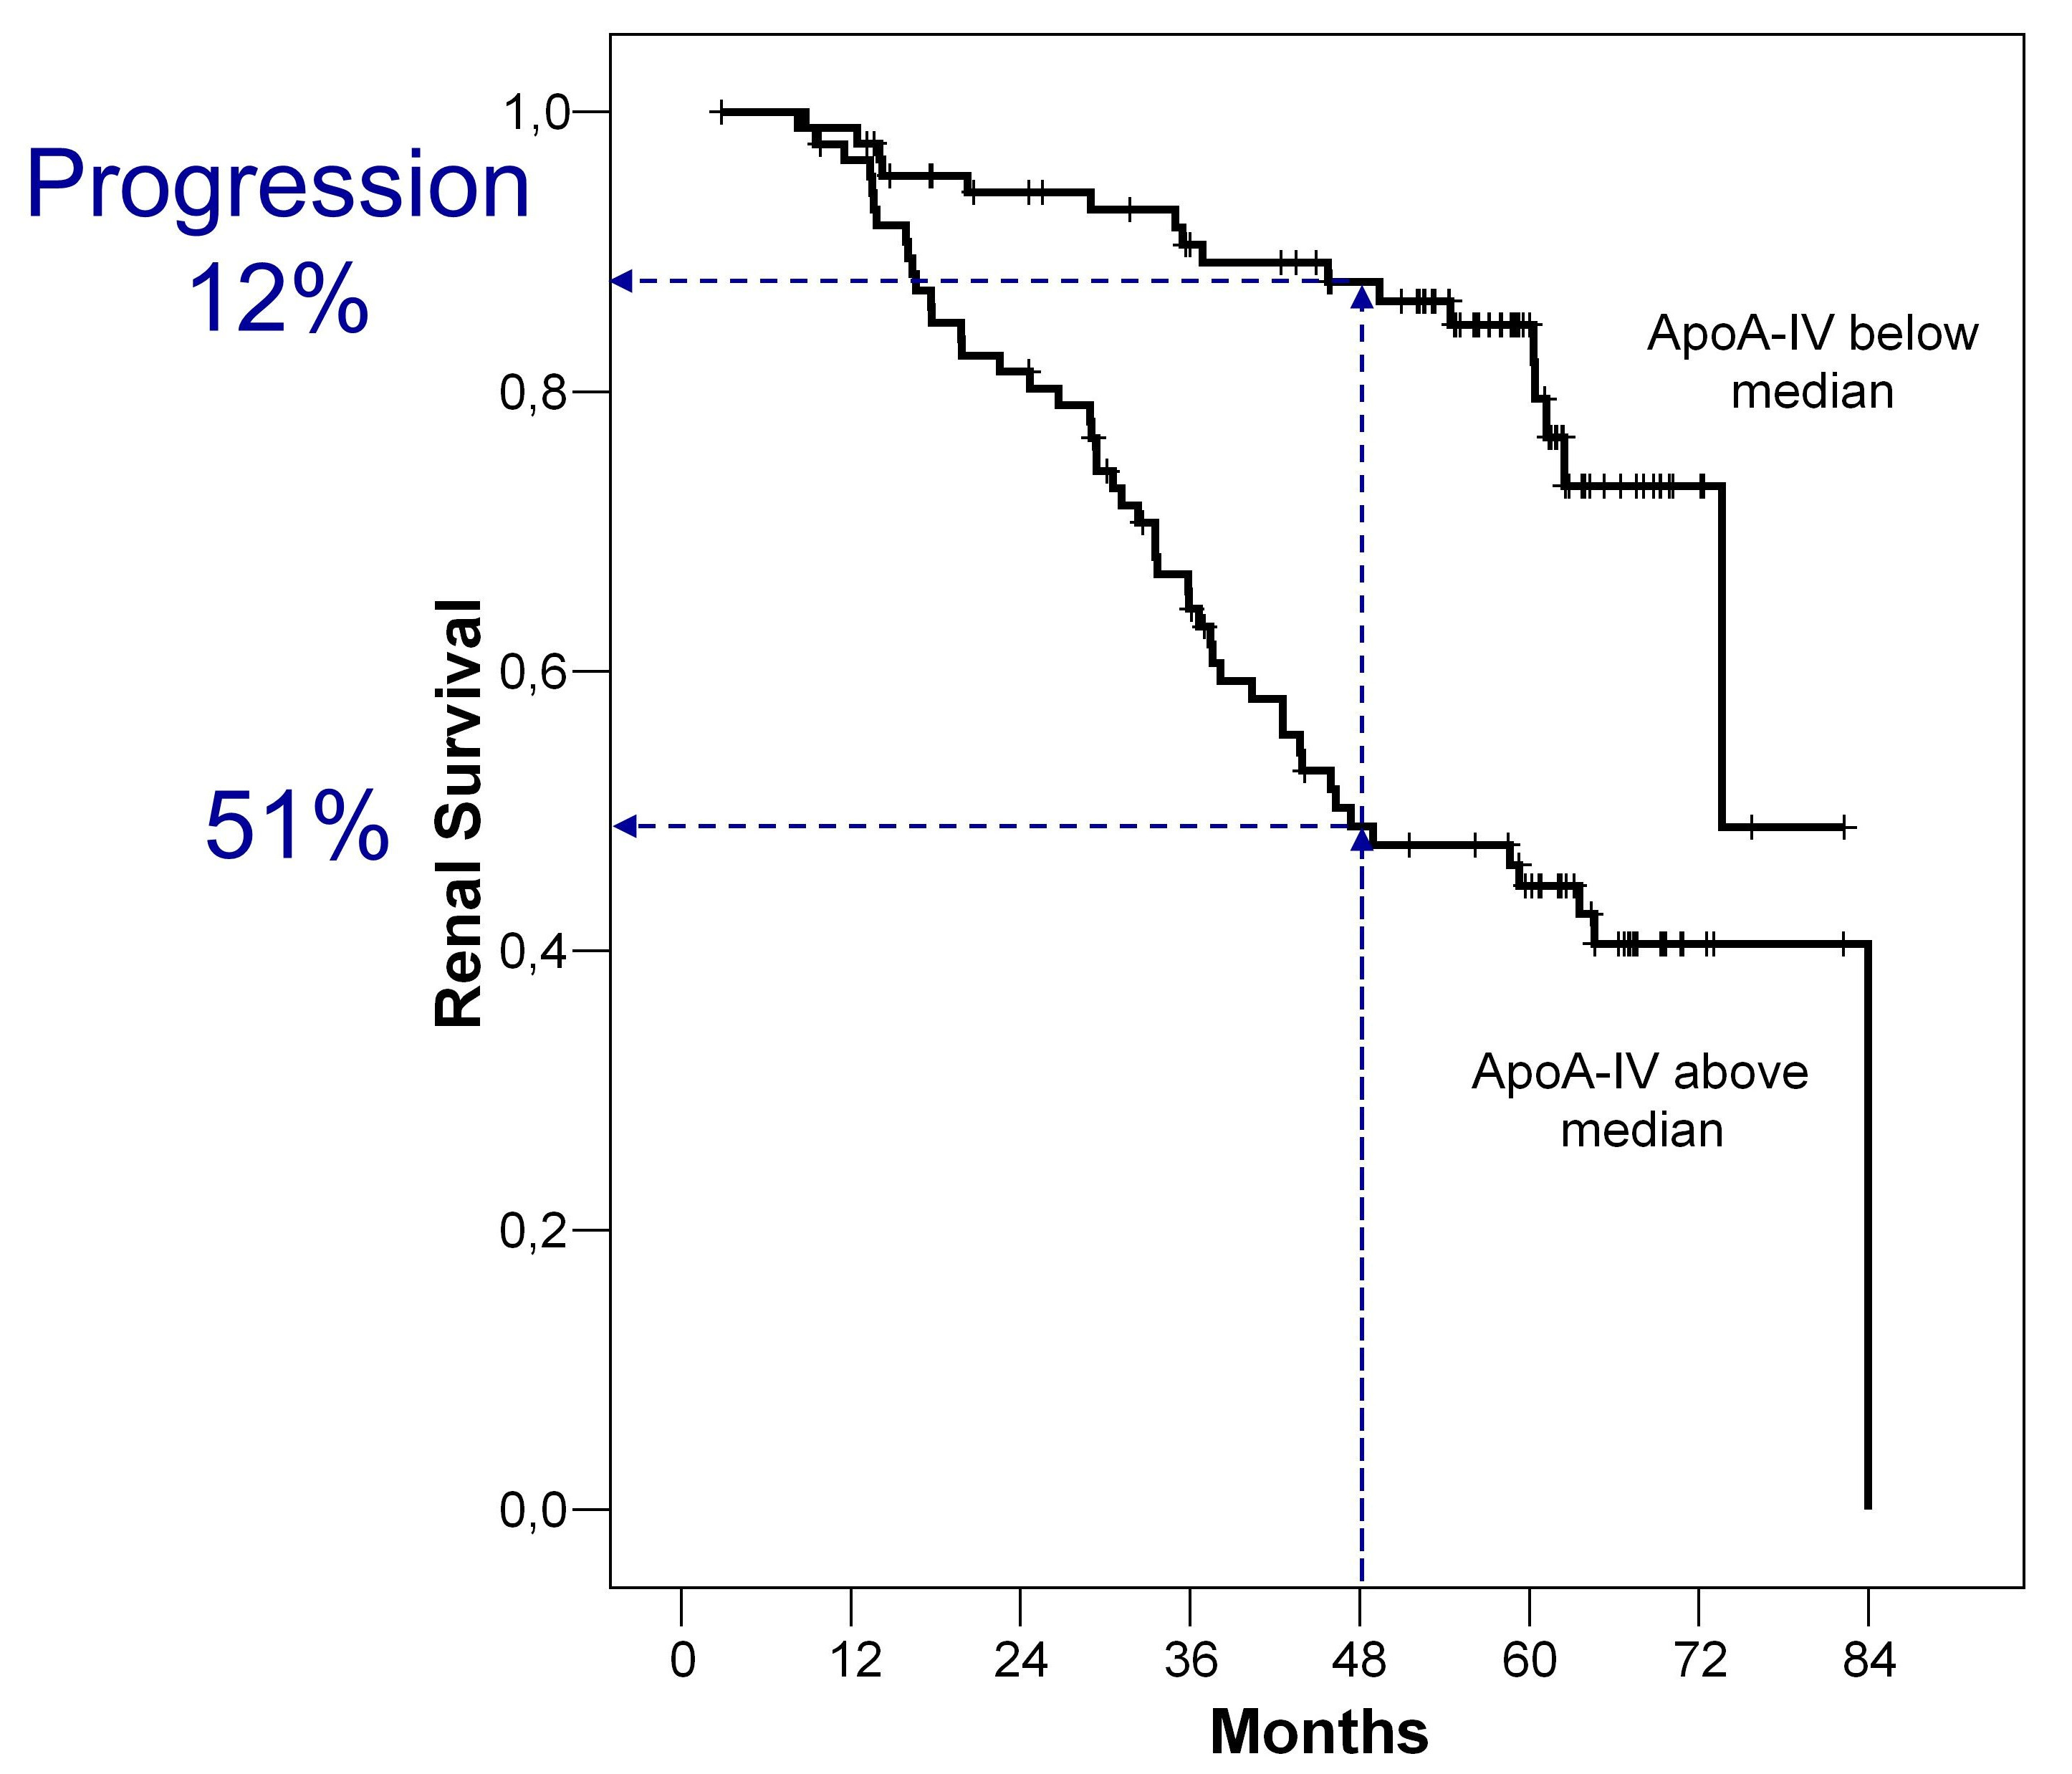 Figure 3: Results from the 'Mild to Moderate Kidney Disease' (MMKD) Study on progression of kidney disease. Kaplan-Meier curves of renal endpoints in patients with infra- and supramedian plasma apoA-IV concentrations (Boes et al.: J. Am. Soc. Nephrol. 2006).